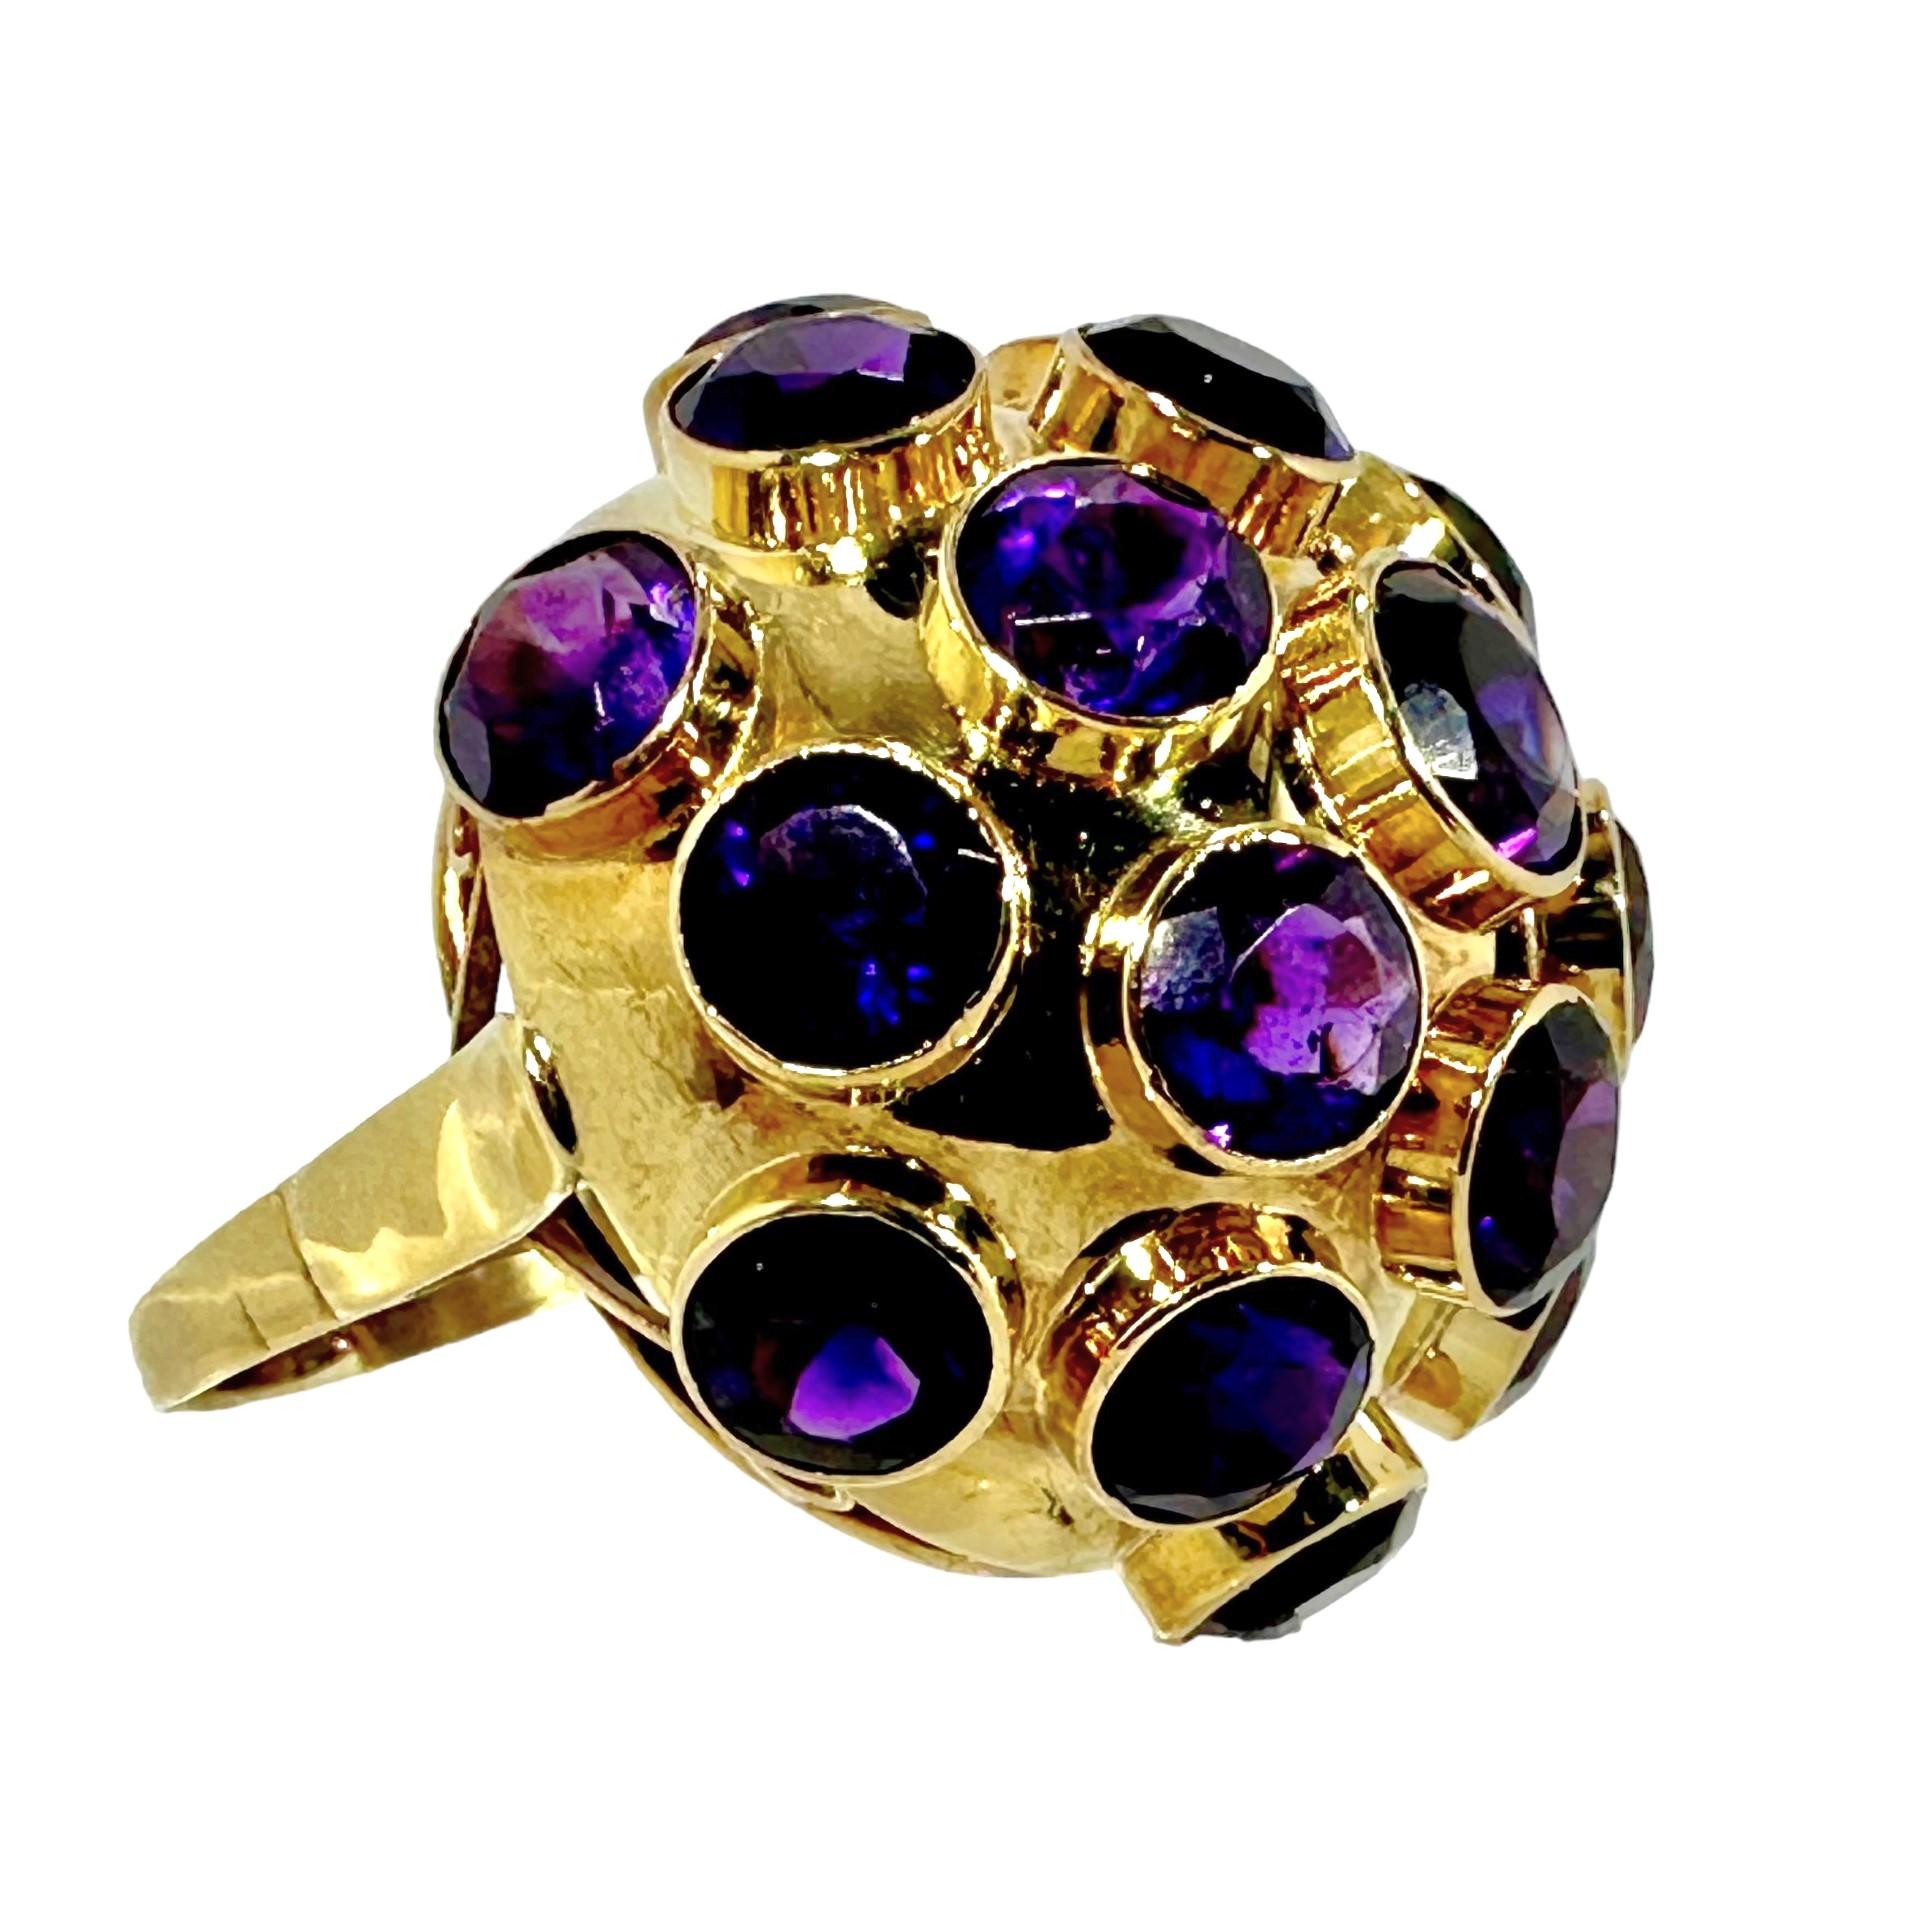 This wonderful and imaginative 18k yellow gold dome ring and others of this genre were no doubt inspired during the 